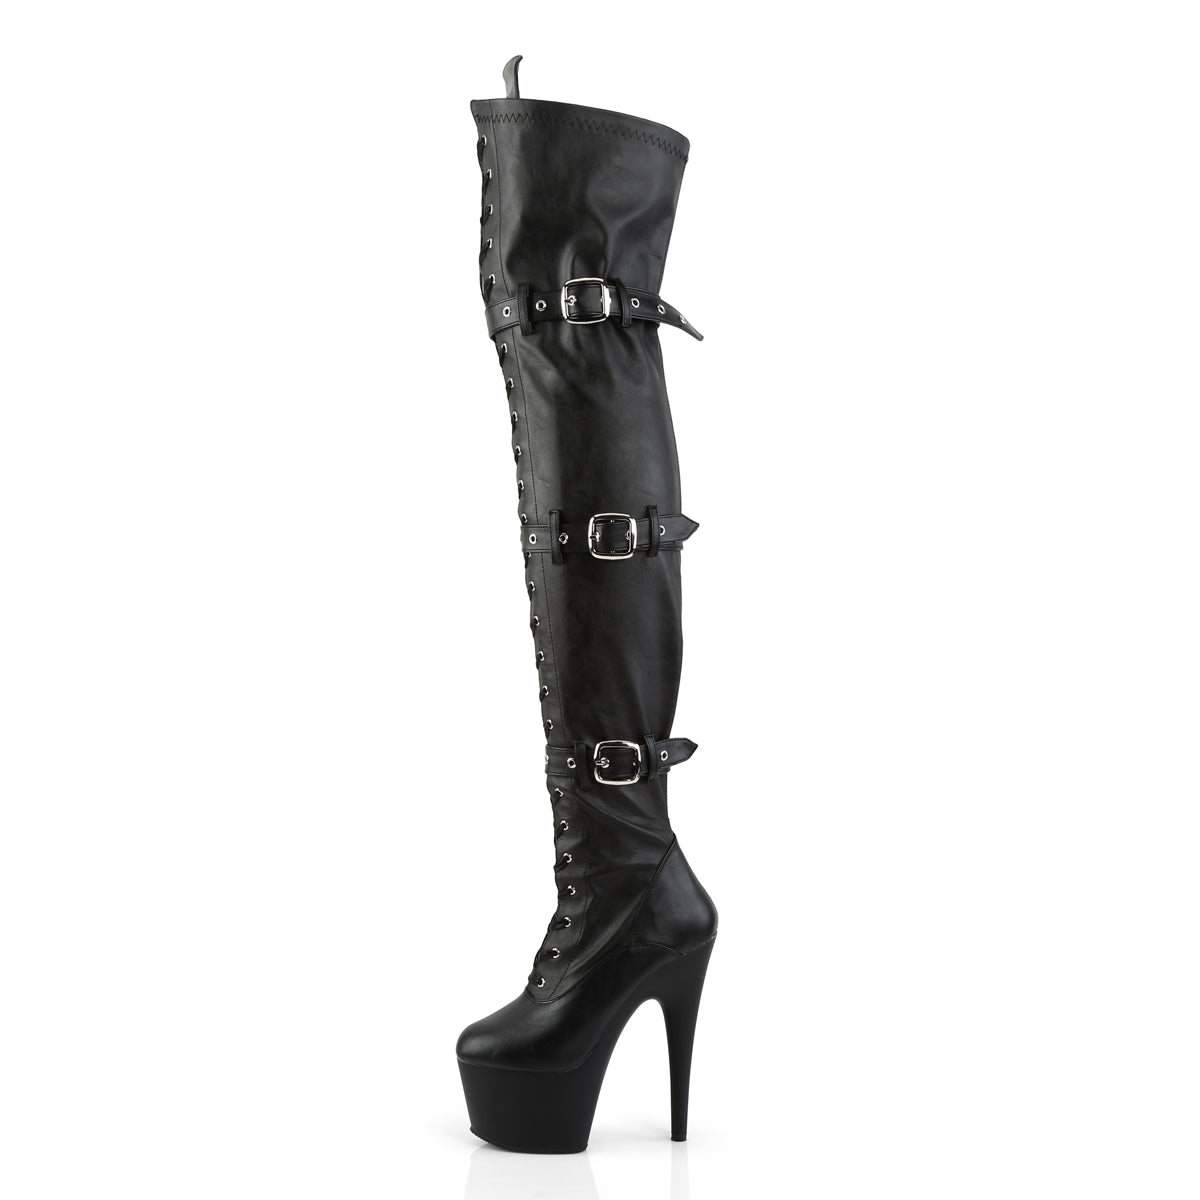 The left side view of the Leatherette Adore Buckle & Lace Up Thigh High Boot.